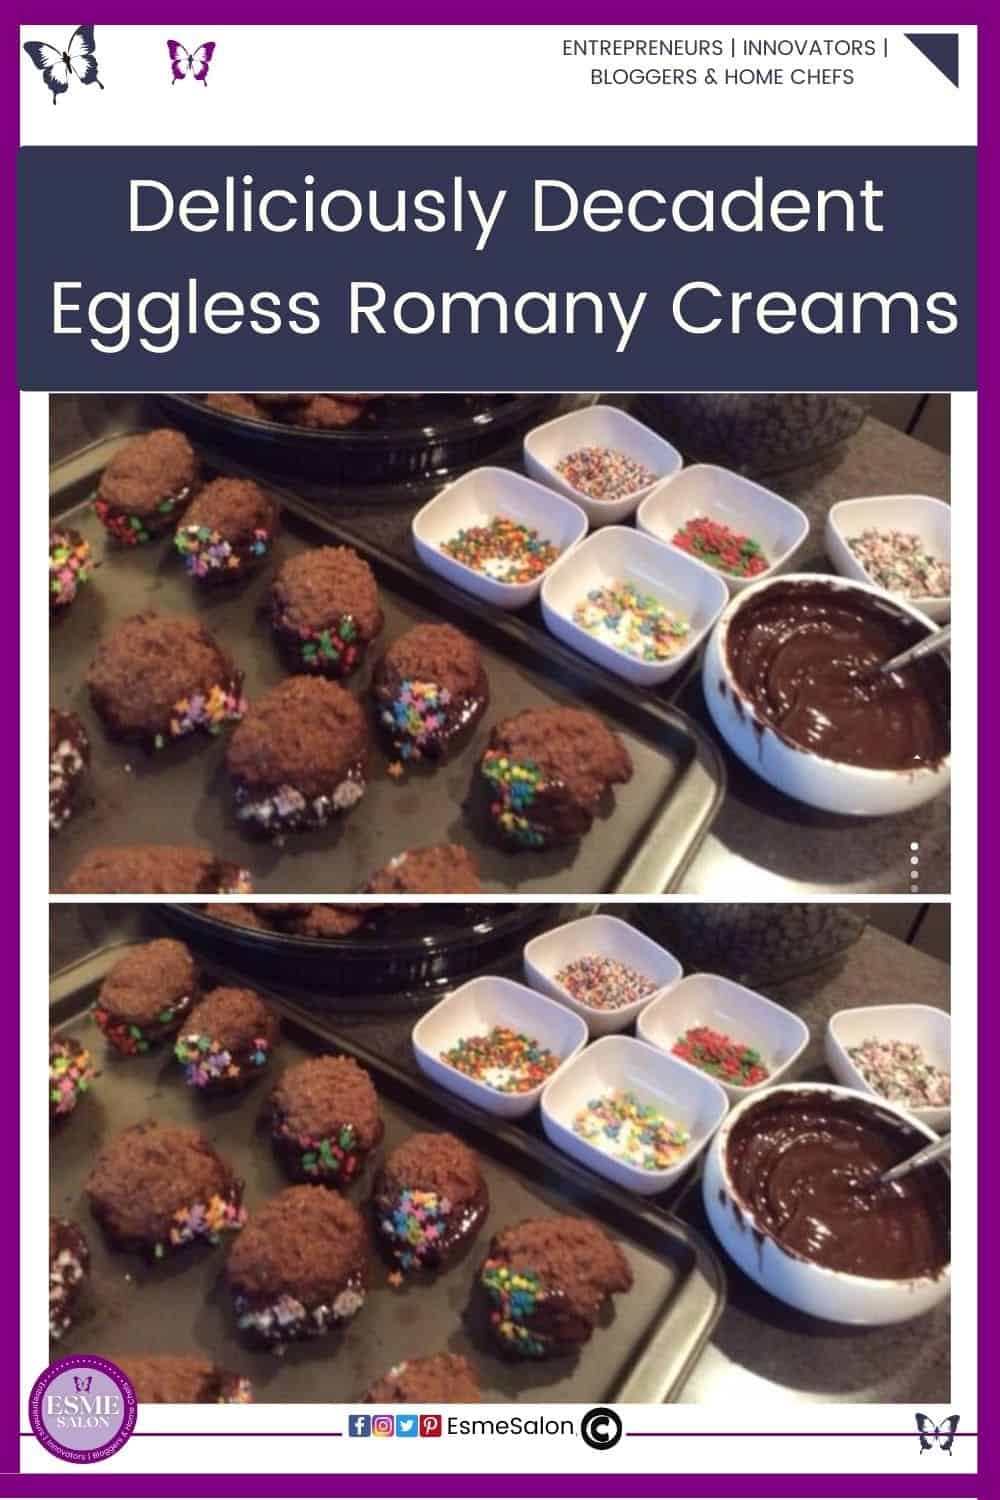 an image of a baking tray with Eggless Romany Creams being filled with chocolate and dipped in sprinkles and bowls of various types of sprinkles and melted chocolate on the side